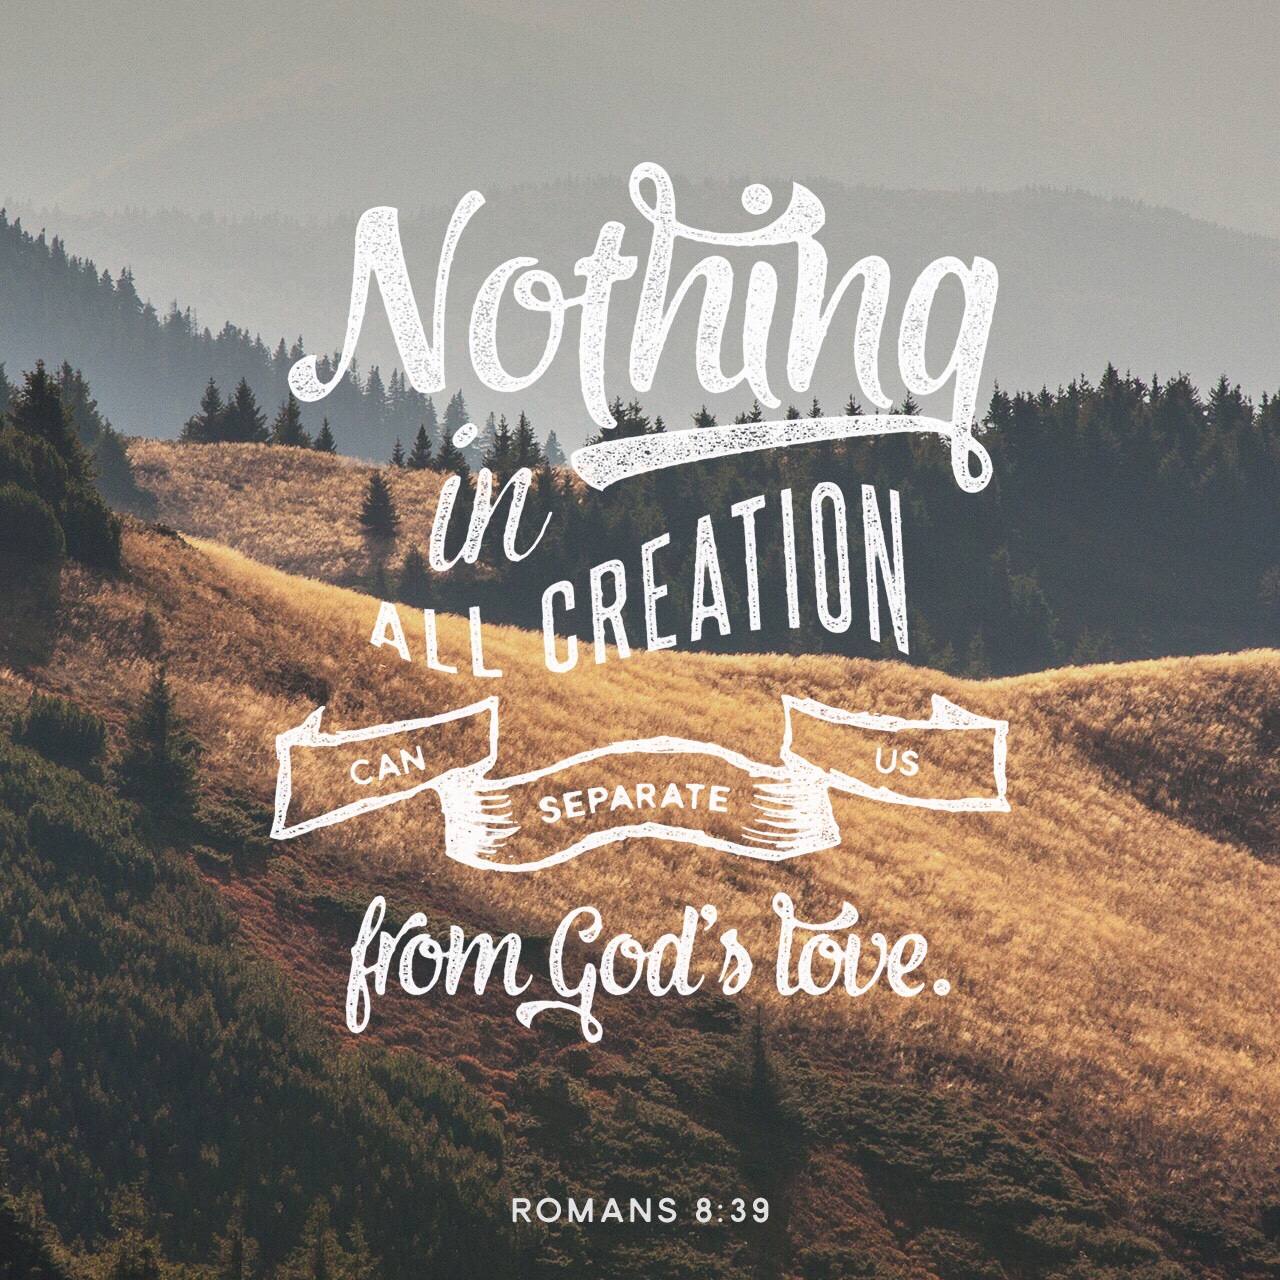 VOTD June 11, 2019 “For I am convinced that neither death, nor life, nor angels, nor principalities, nor things present, nor things to come, nor powers, nor height, nor depth, nor any other created thing, will be able to separate us from the love of God, which is in Christ Jesus our Lord.” ‭‭ROMANS‬ ‭8:38-39‬ ‭NASB‬‬